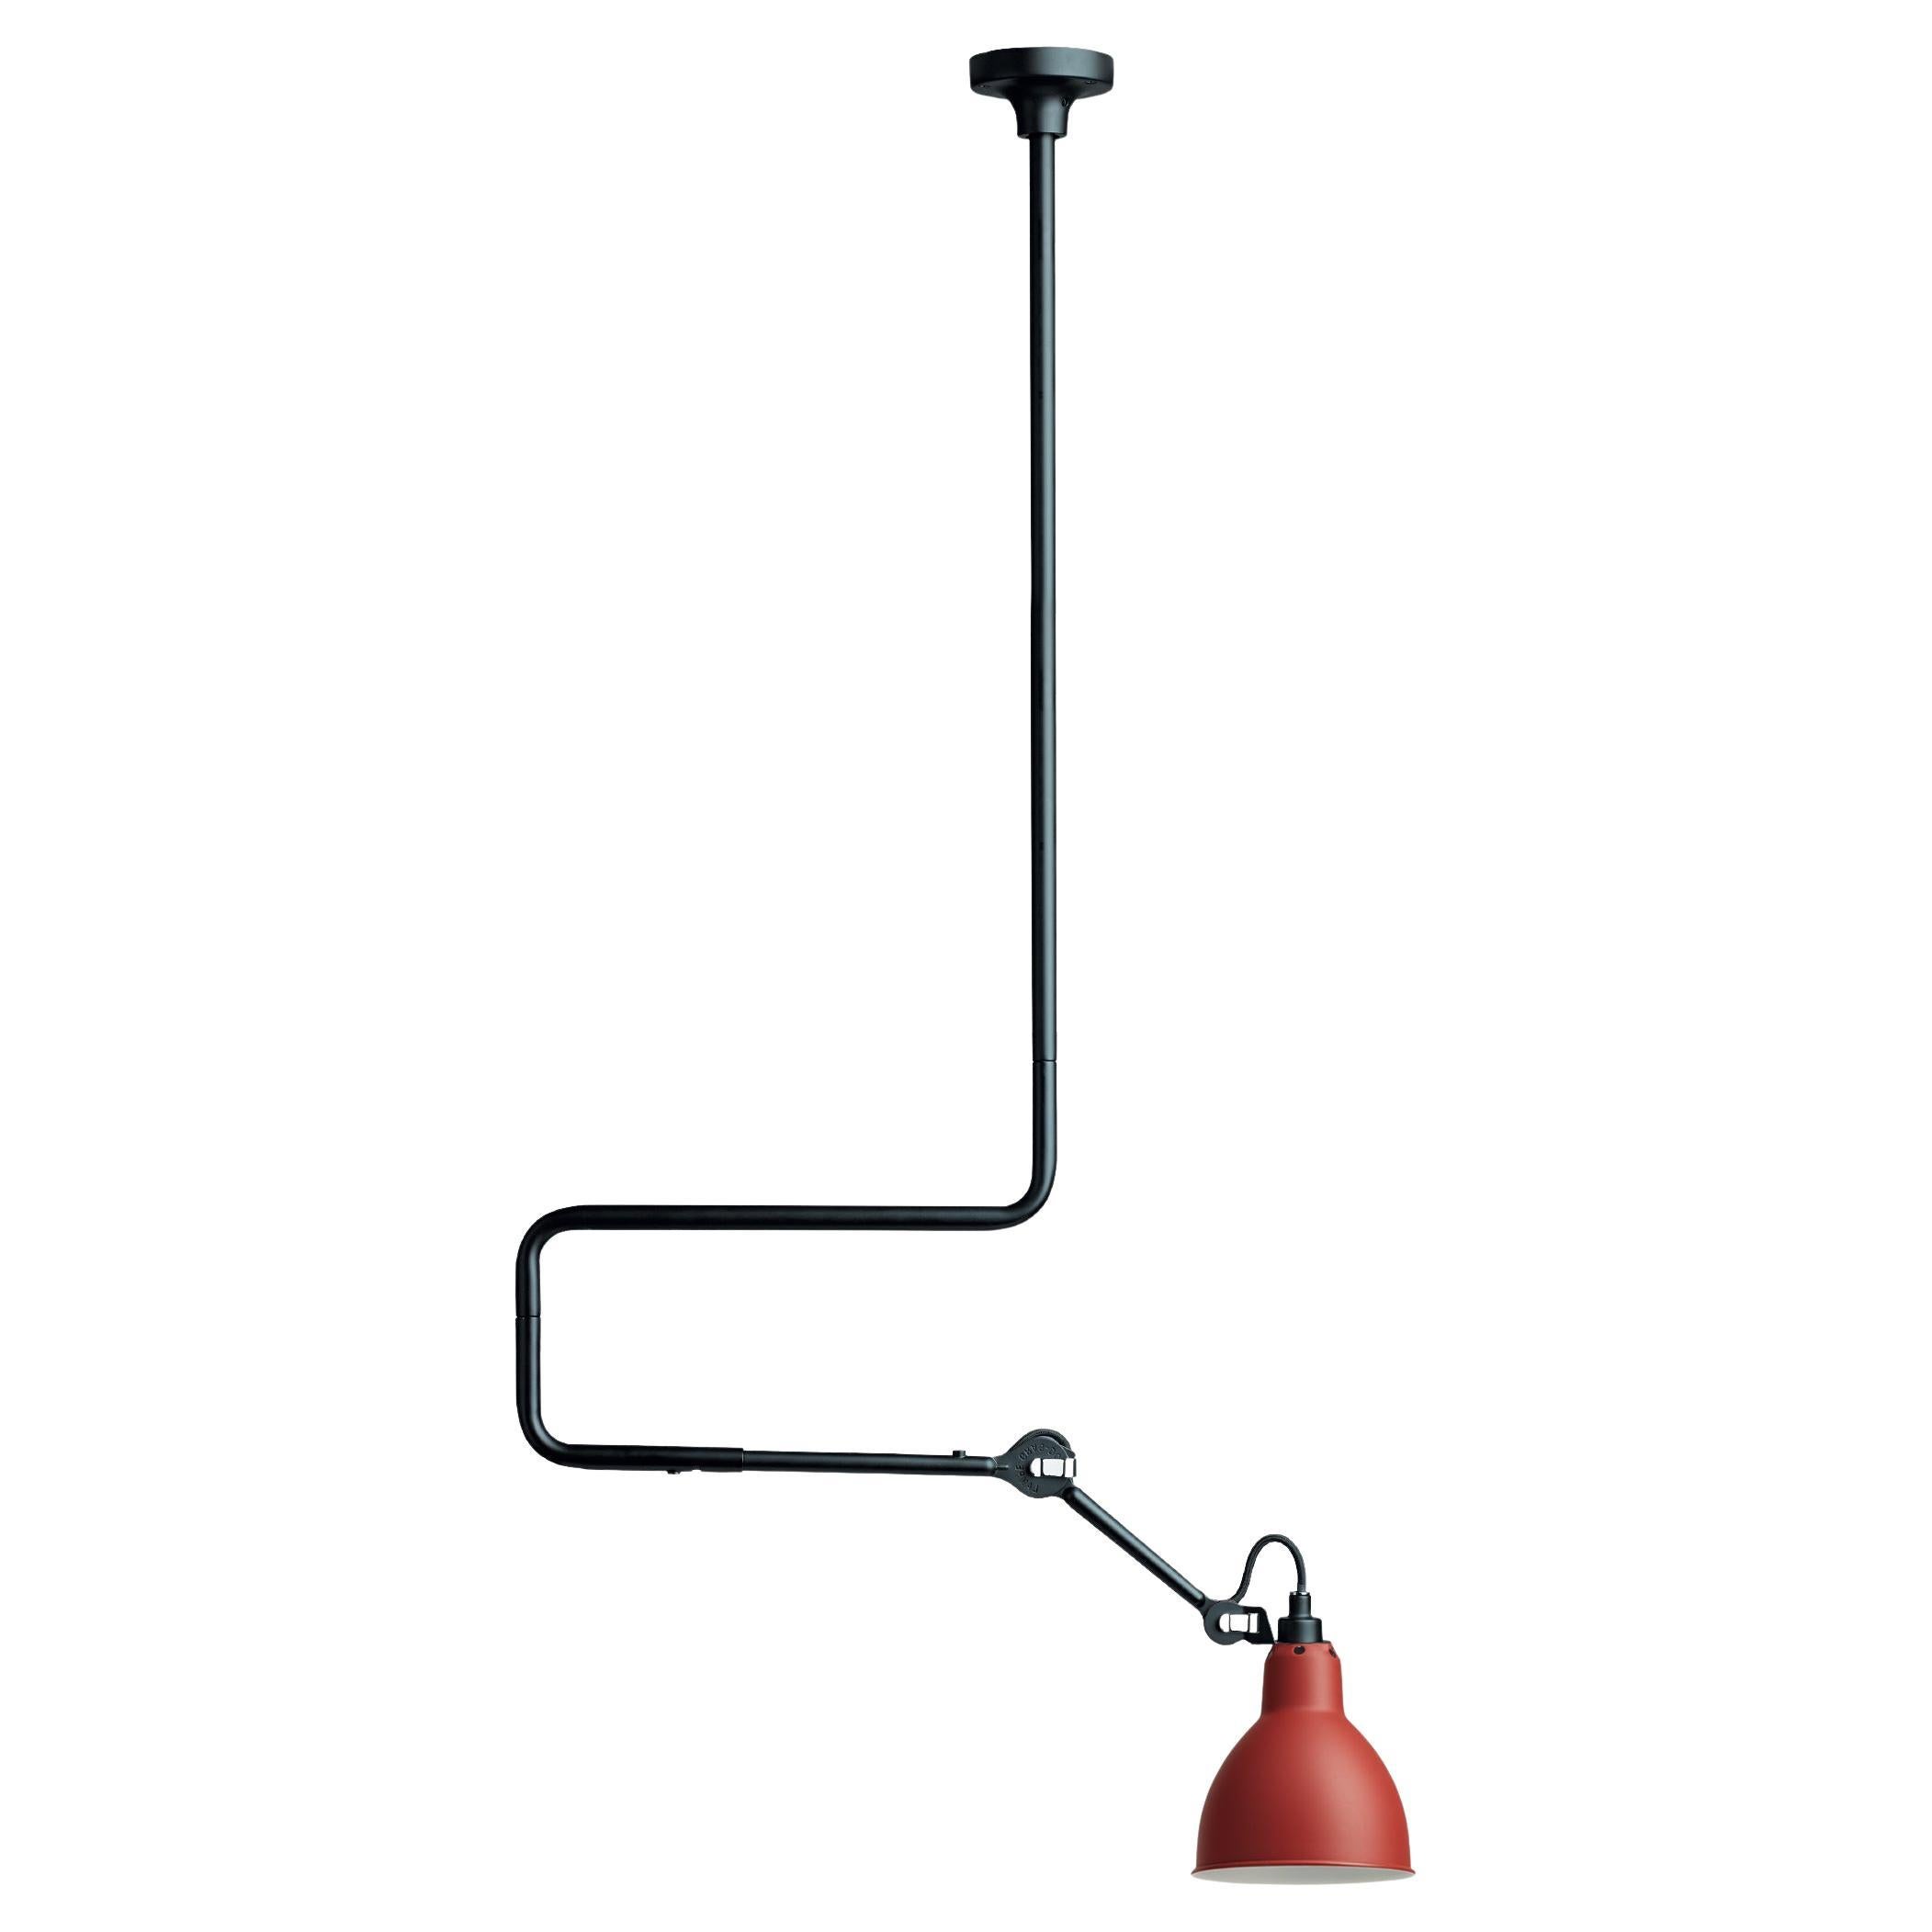 DCW Editions La Lampe Gras N°312 Pendant Lamp w/Extension in Red Shade